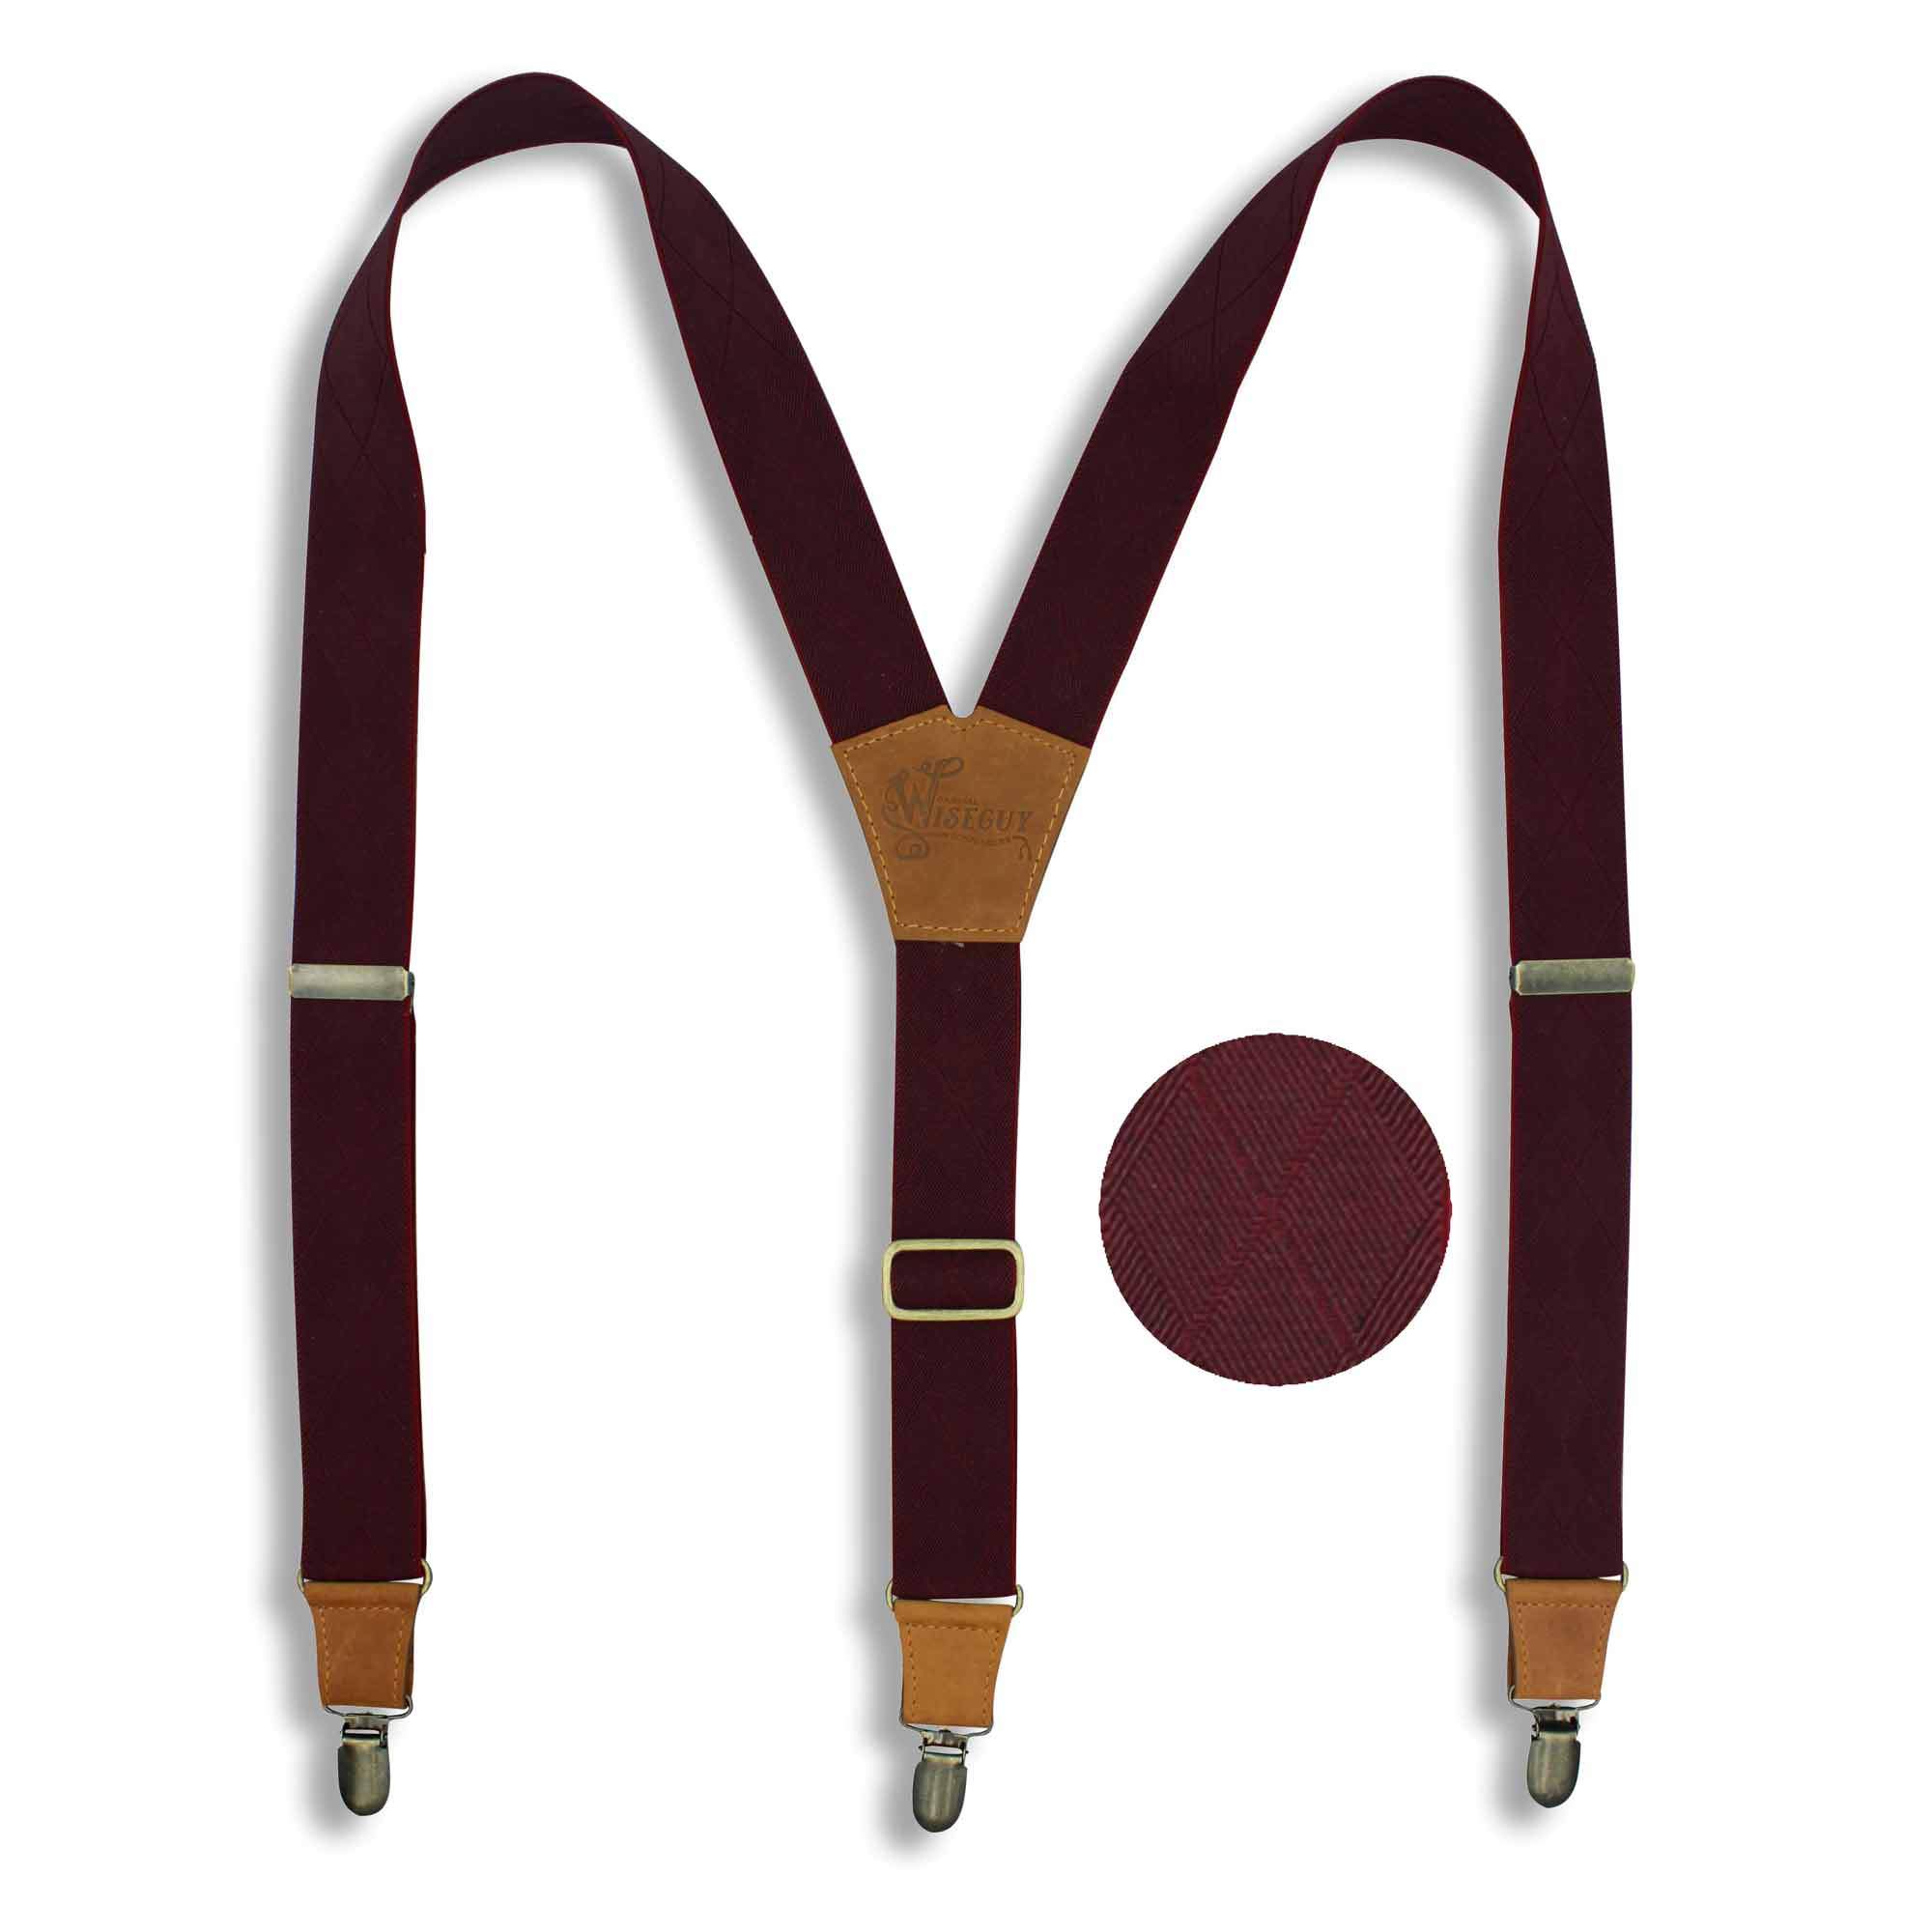 Burgundy with Checkered Woven Pattern formal mens Suspenders 1.3 inch - Wiseguy Suspenders